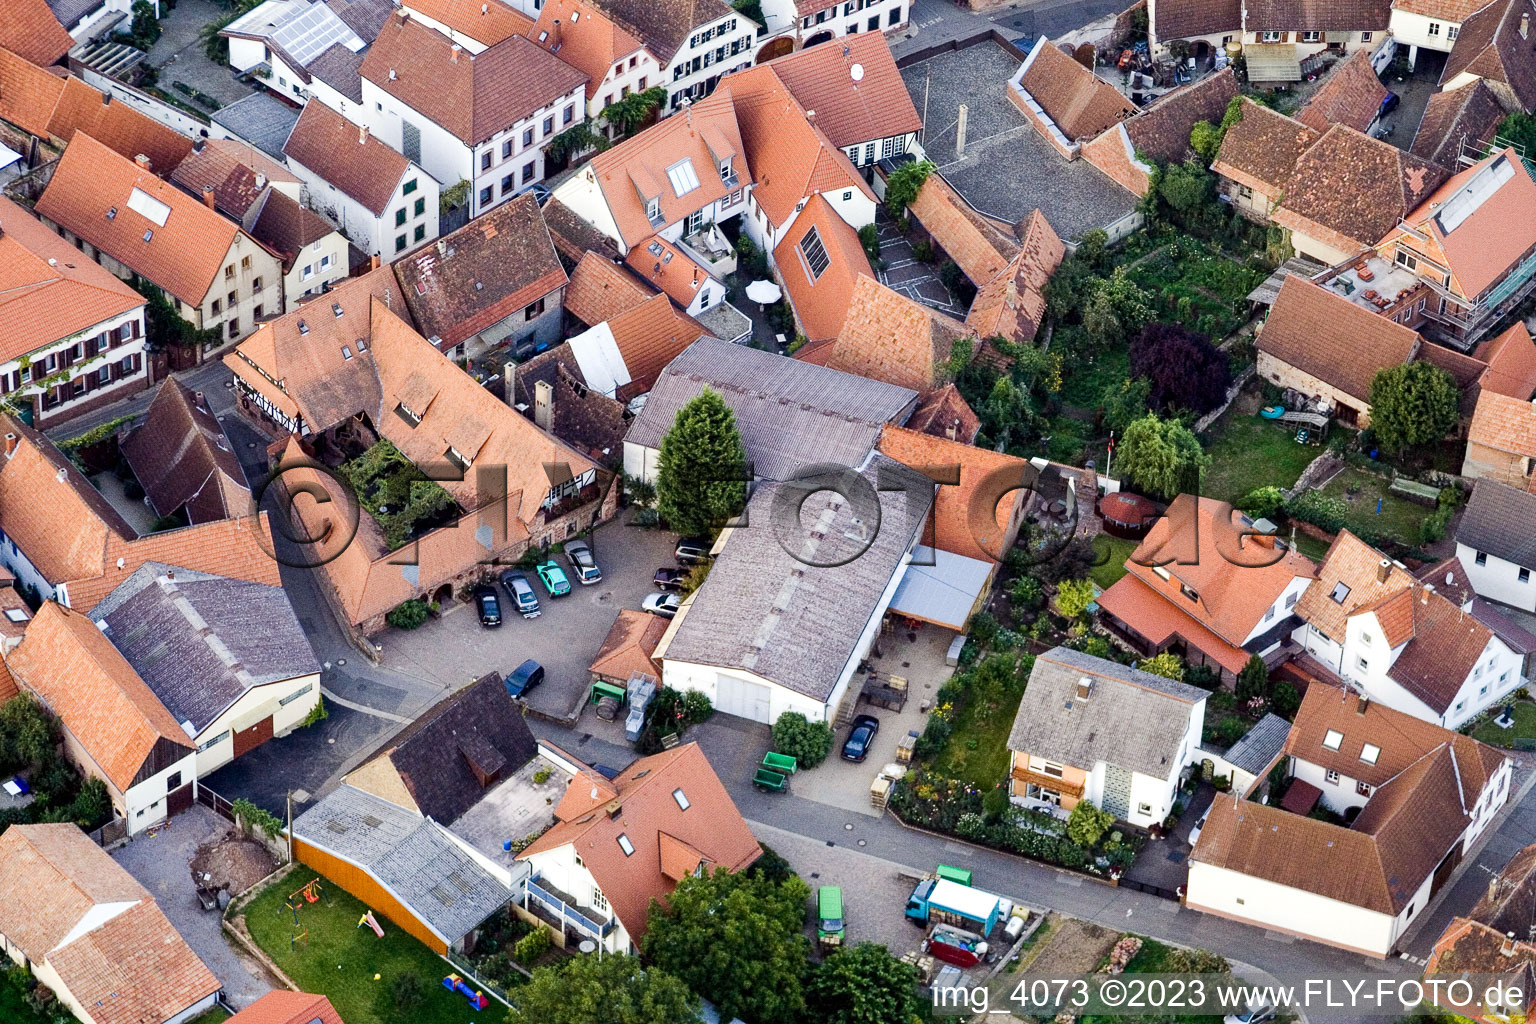 Birkweiler in the state Rhineland-Palatinate, Germany from a drone